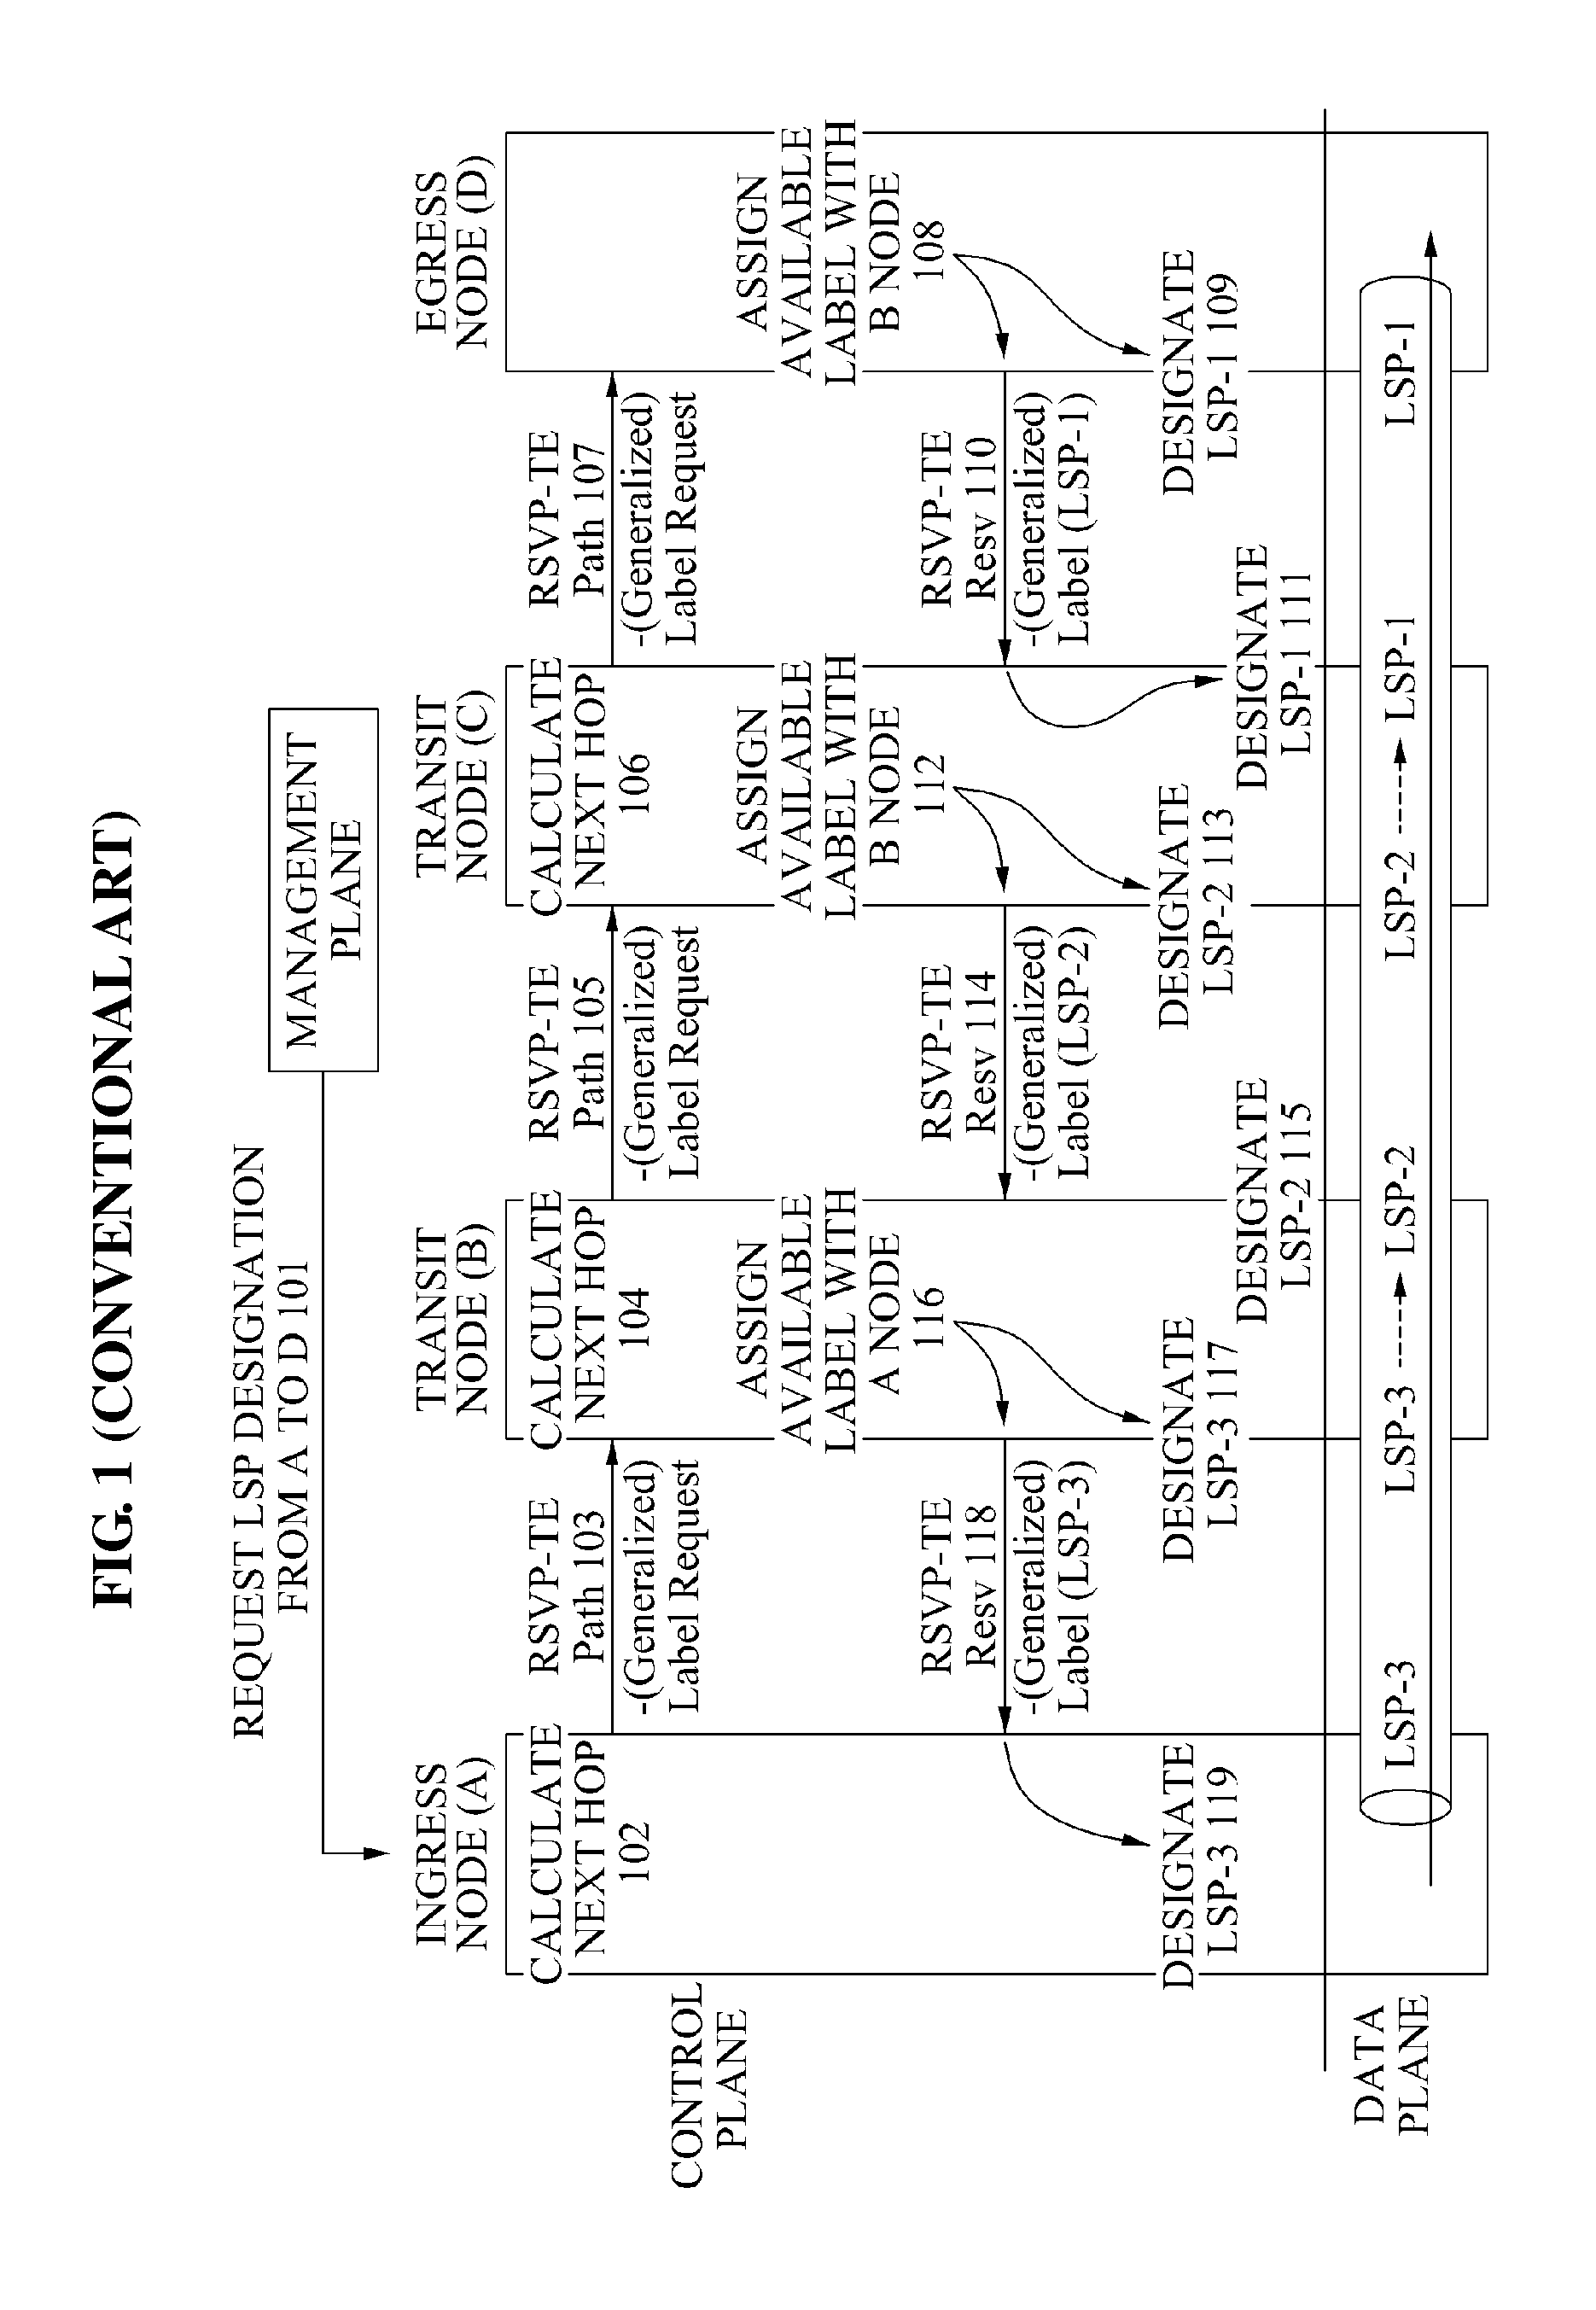 Apparatus and method of controlling lsp of rsvp-te protocol using label with availability of end-to-end range